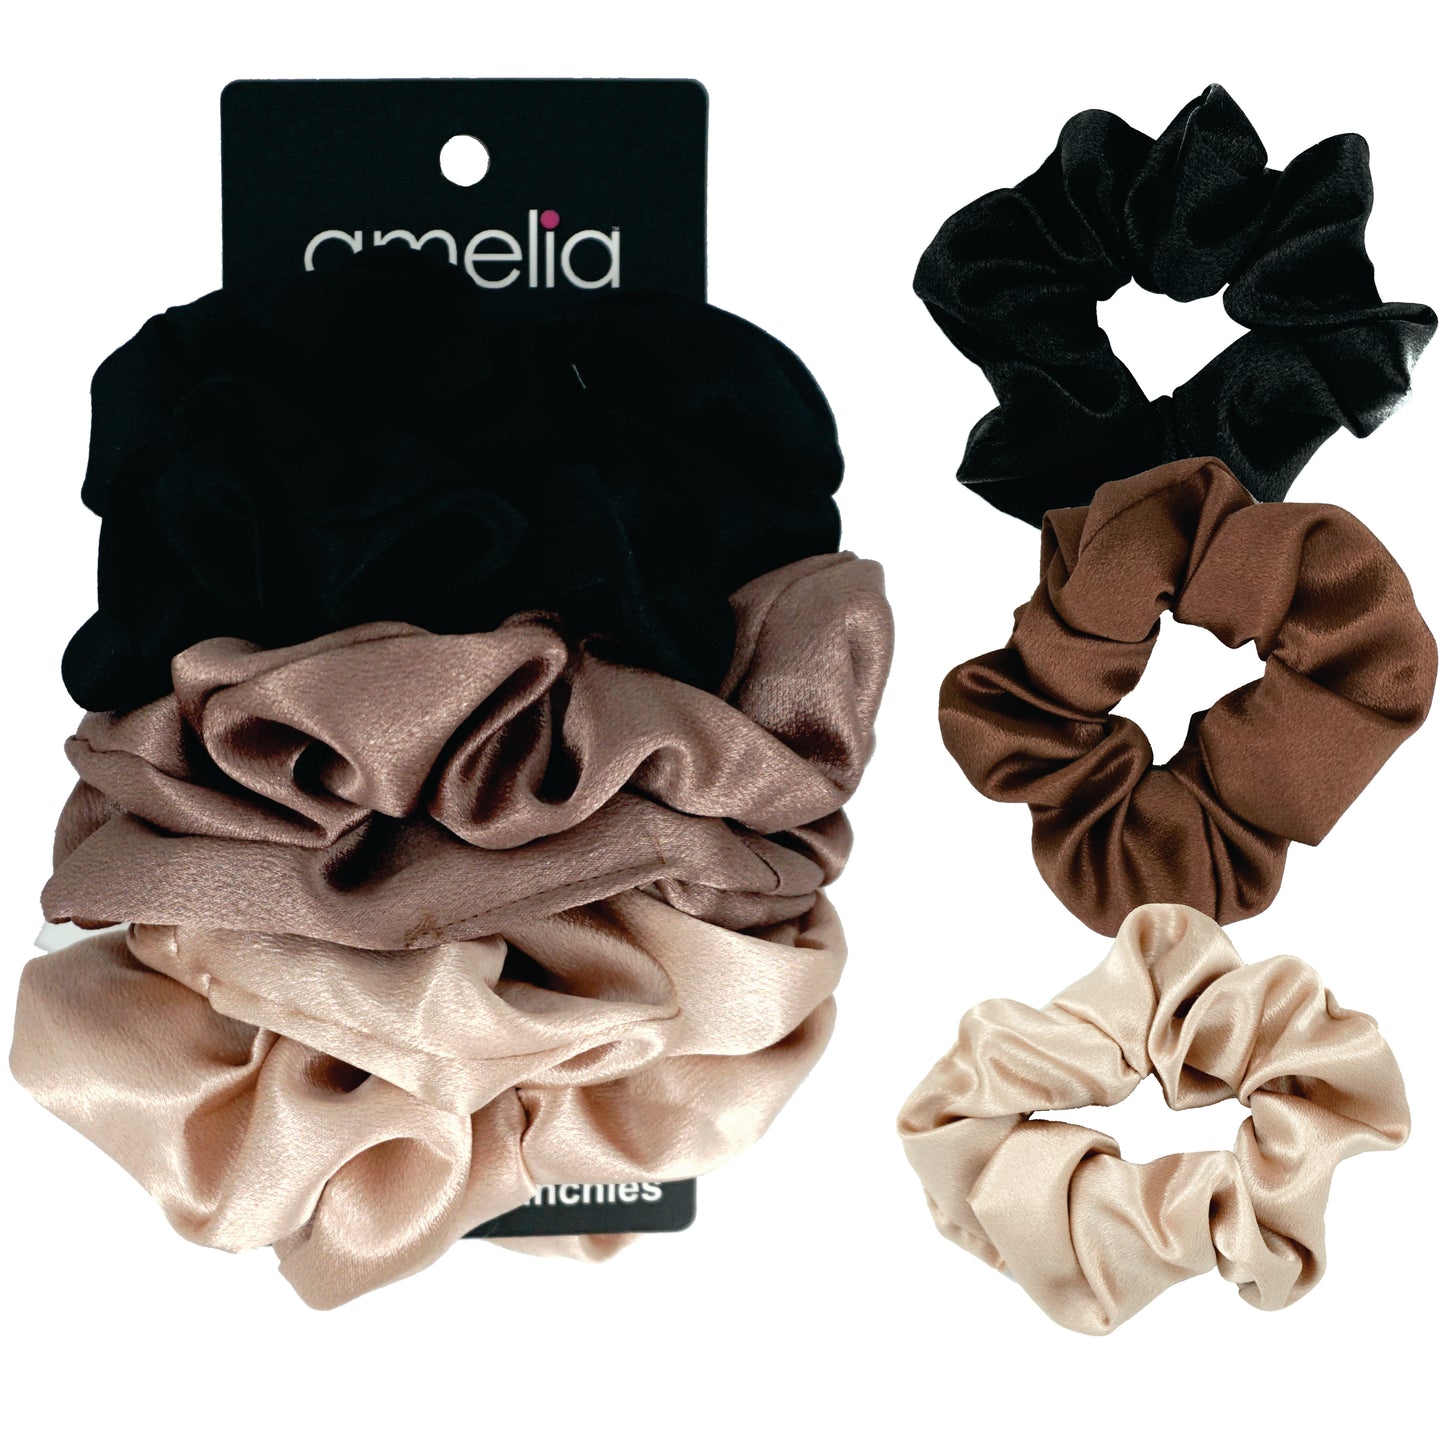 Amelia Beauty Products, Black, Brown and Tan Imitation Silk Scrunchies, 4.5in Diameter, Gentle on Hair, Strong Hold, No Snag, No Dents or Creases. 6 Pack